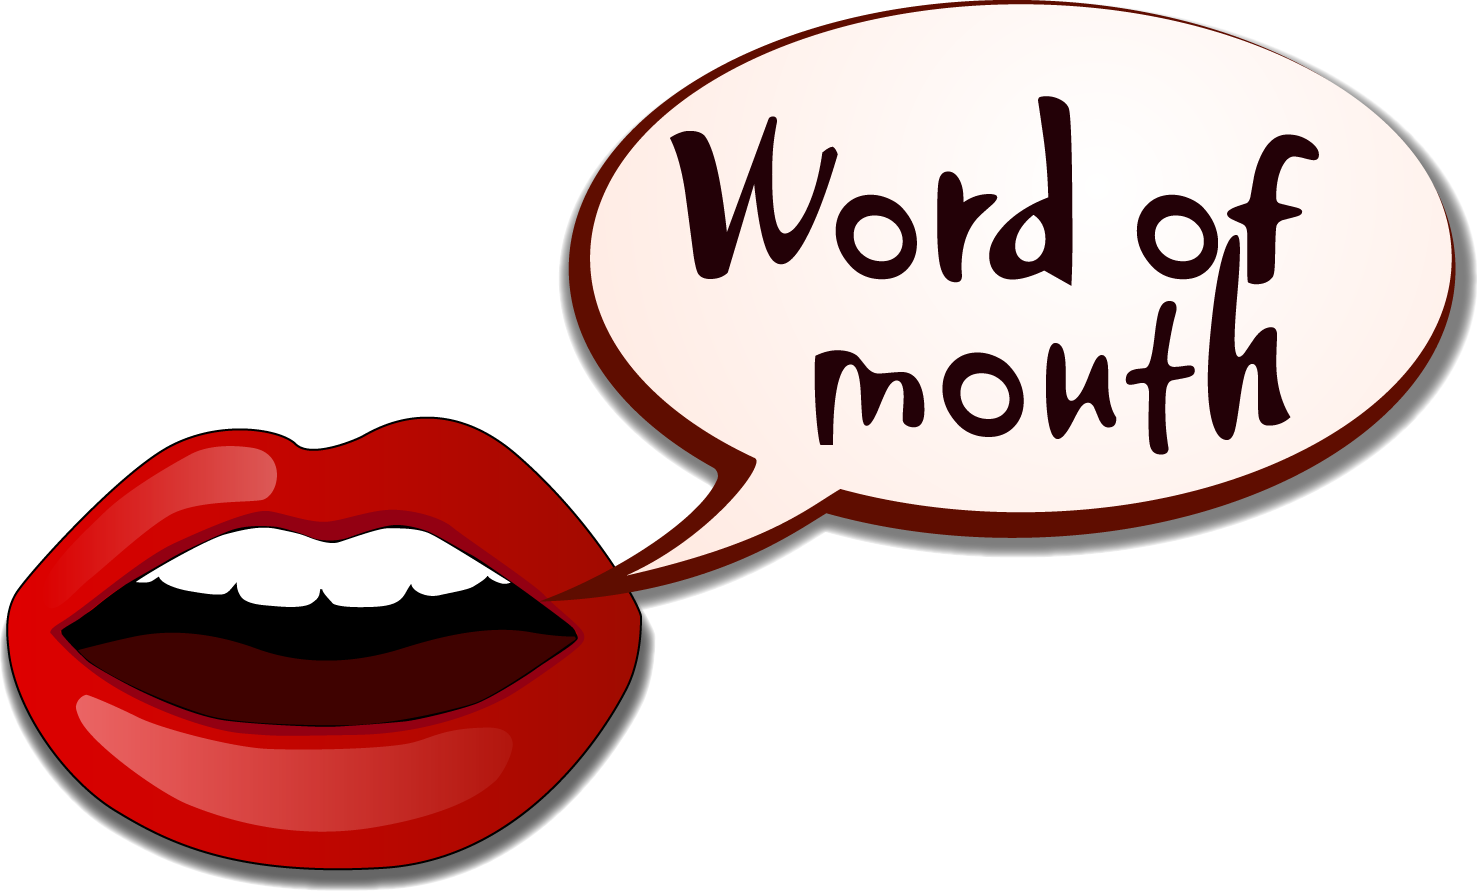 Word of mouth. Word-of-mouth иконка. Рот картинка. Губы логотип. Английское слово mouth